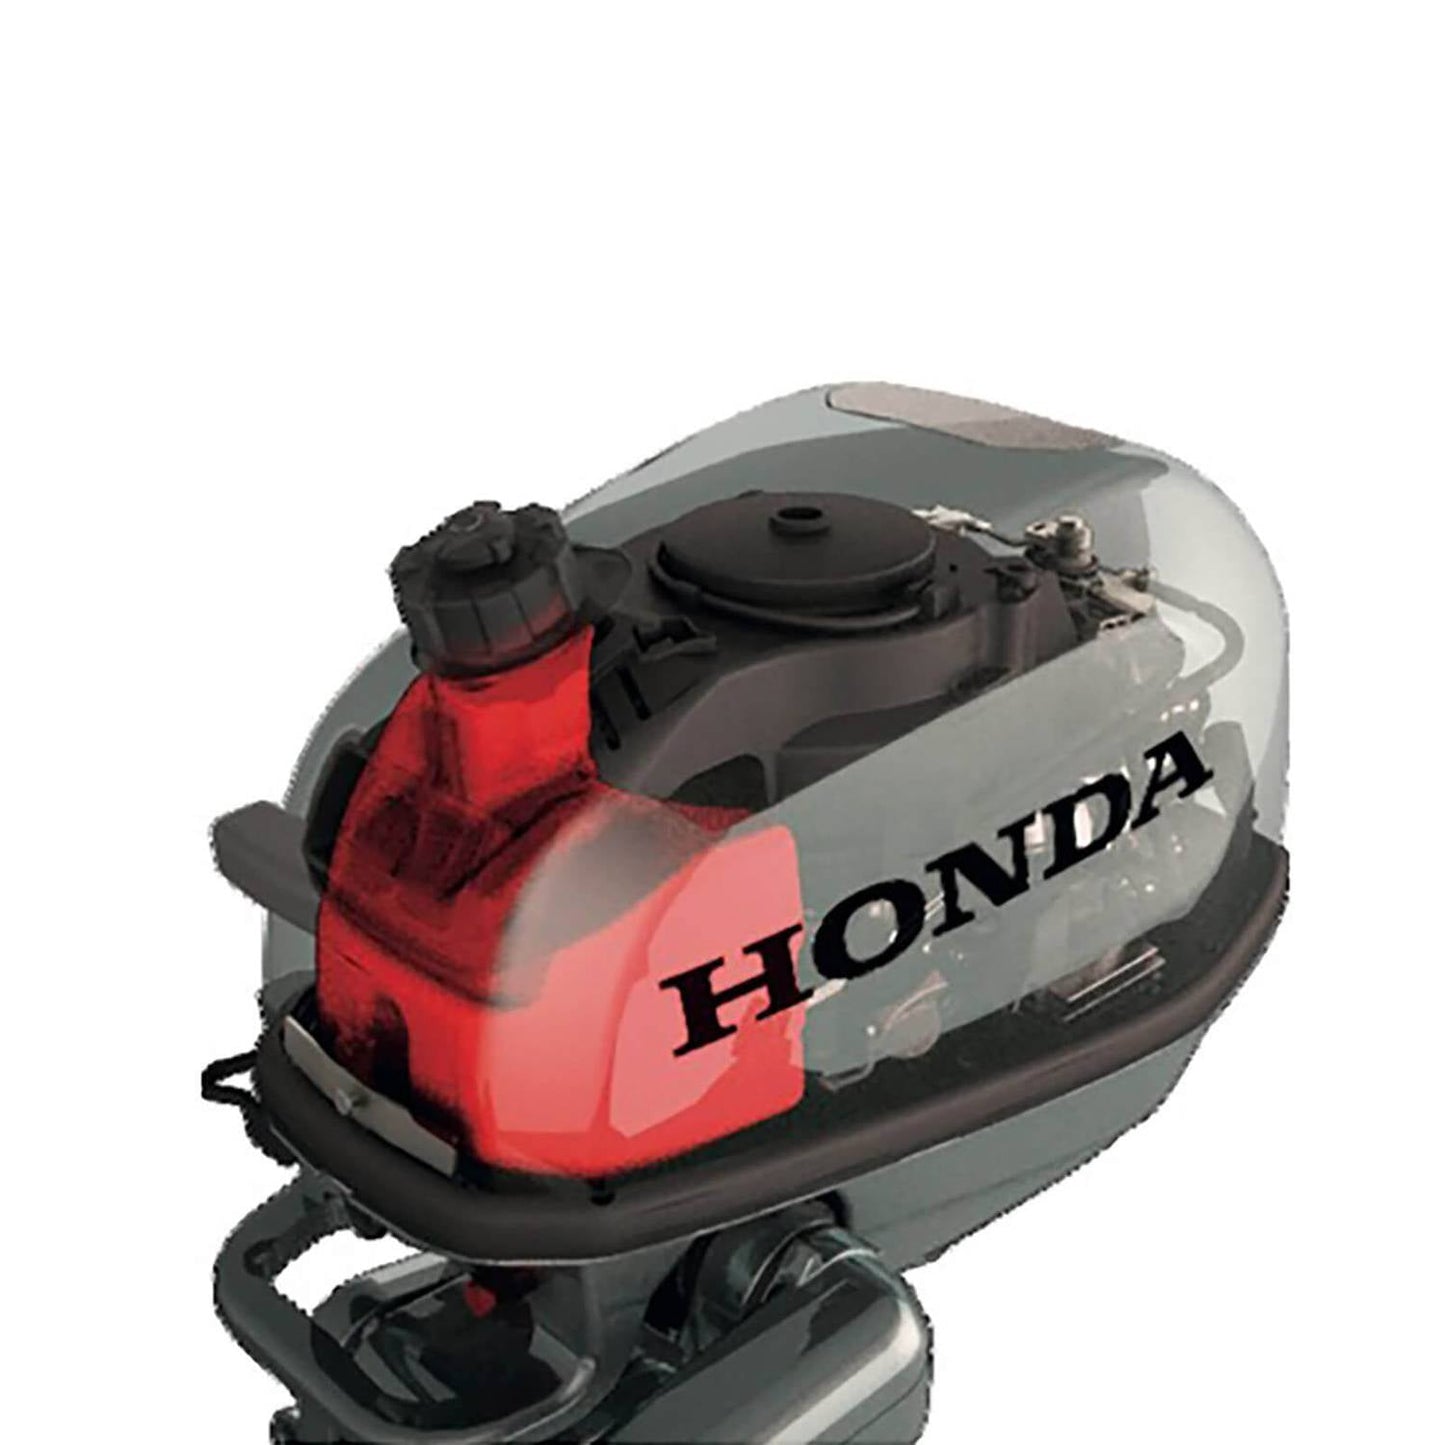 Honda Outboard BF5 LHU 5hp Long Shaft and 6 amp charging coil